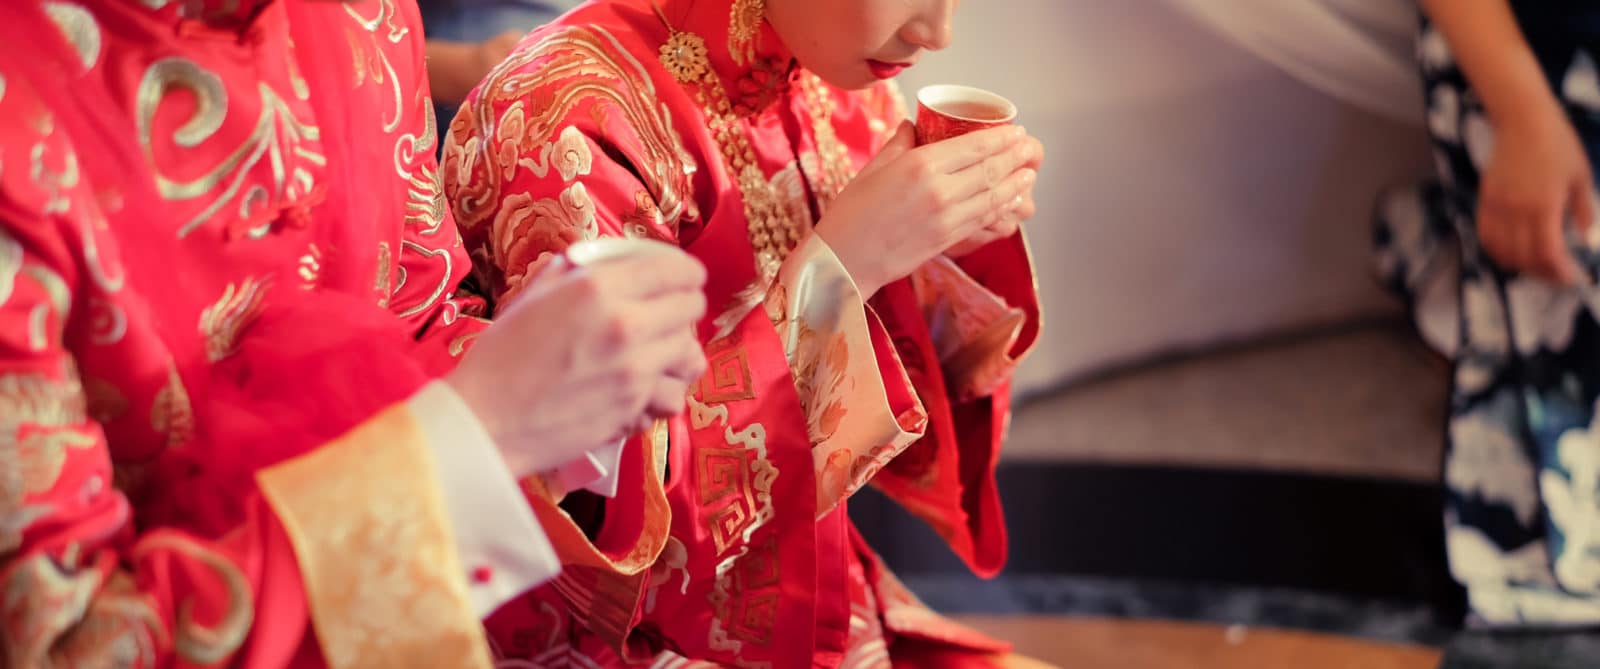 Chinese people during tea ceremony wearing the color red